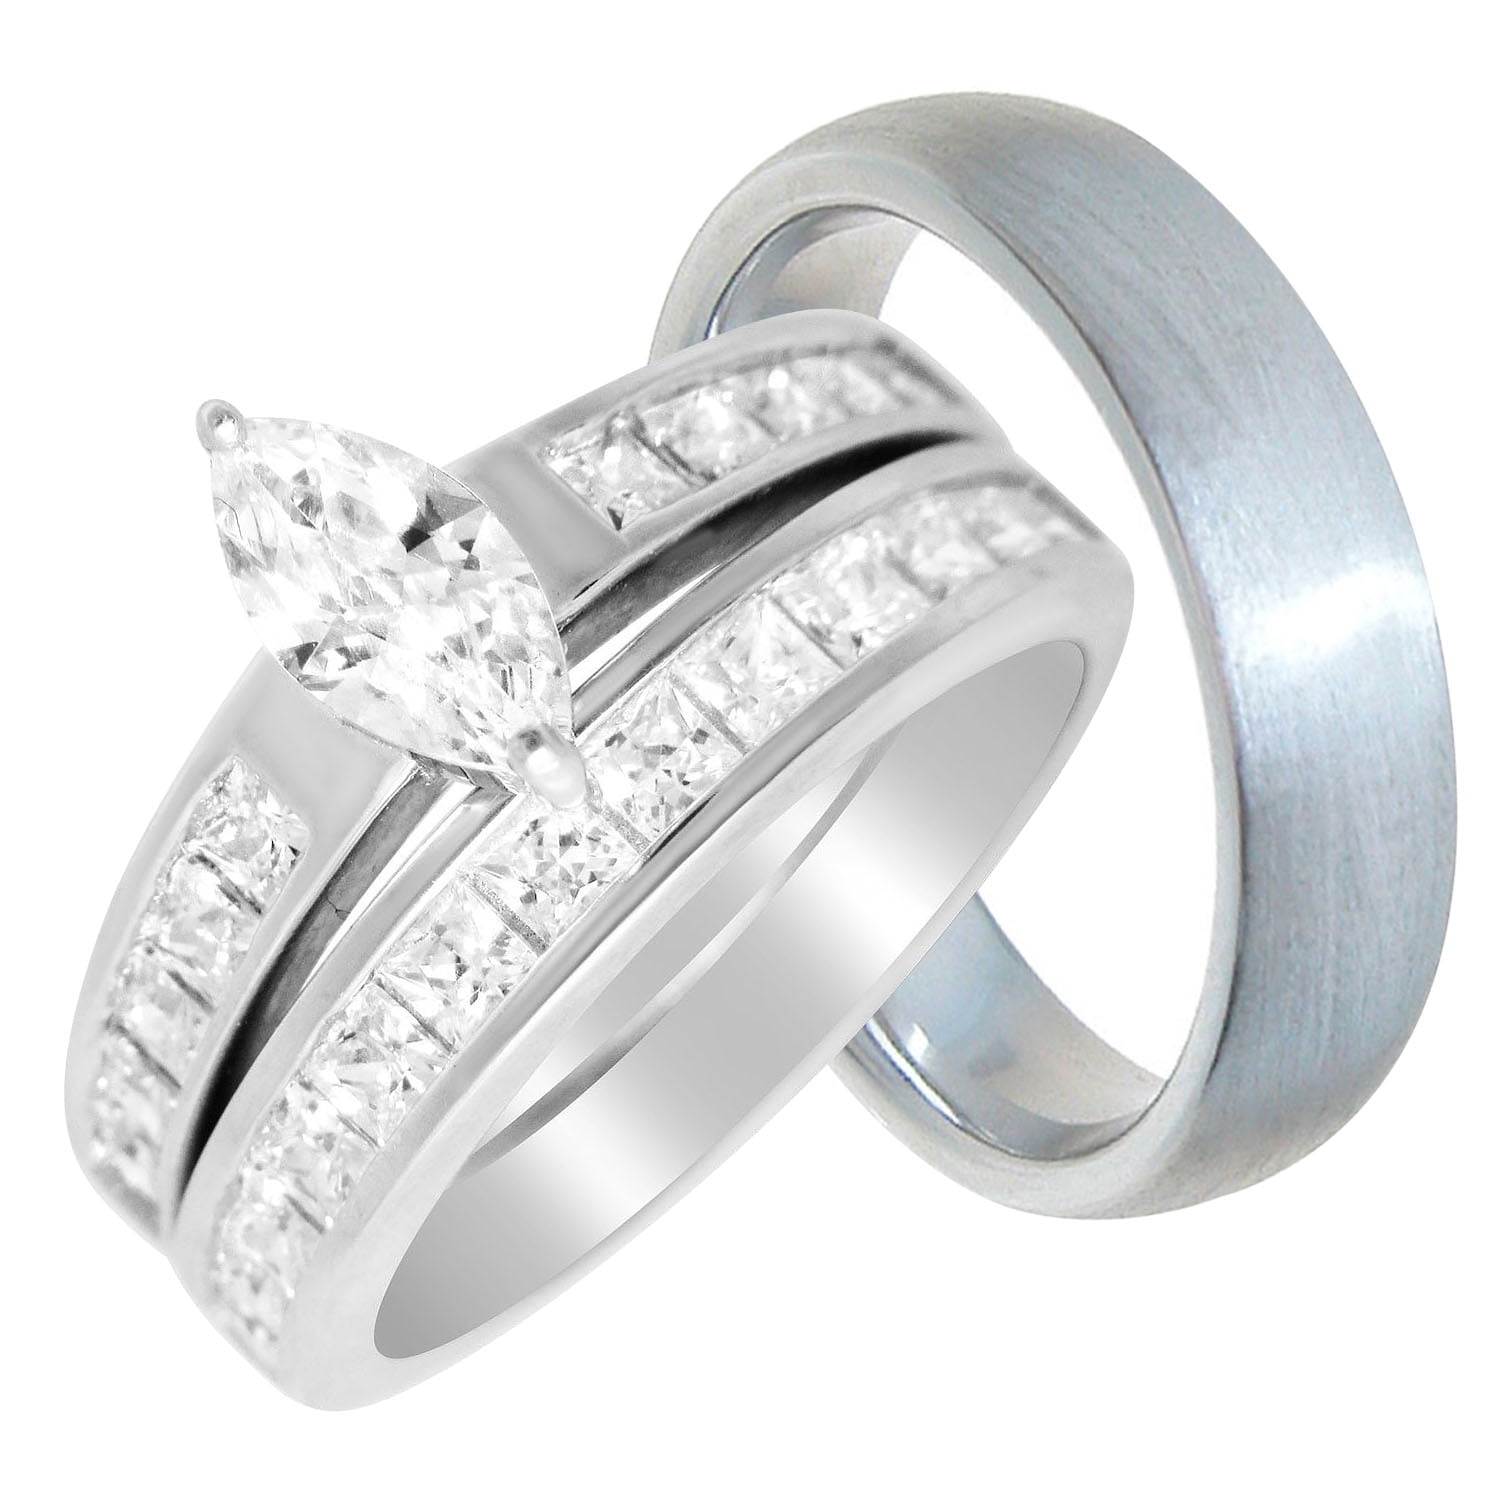 LaRaso & Co - His Hers Wedding Rings Set Cheap Wedding Bands for Him Her 7/8 - www.bagsaleusa.com